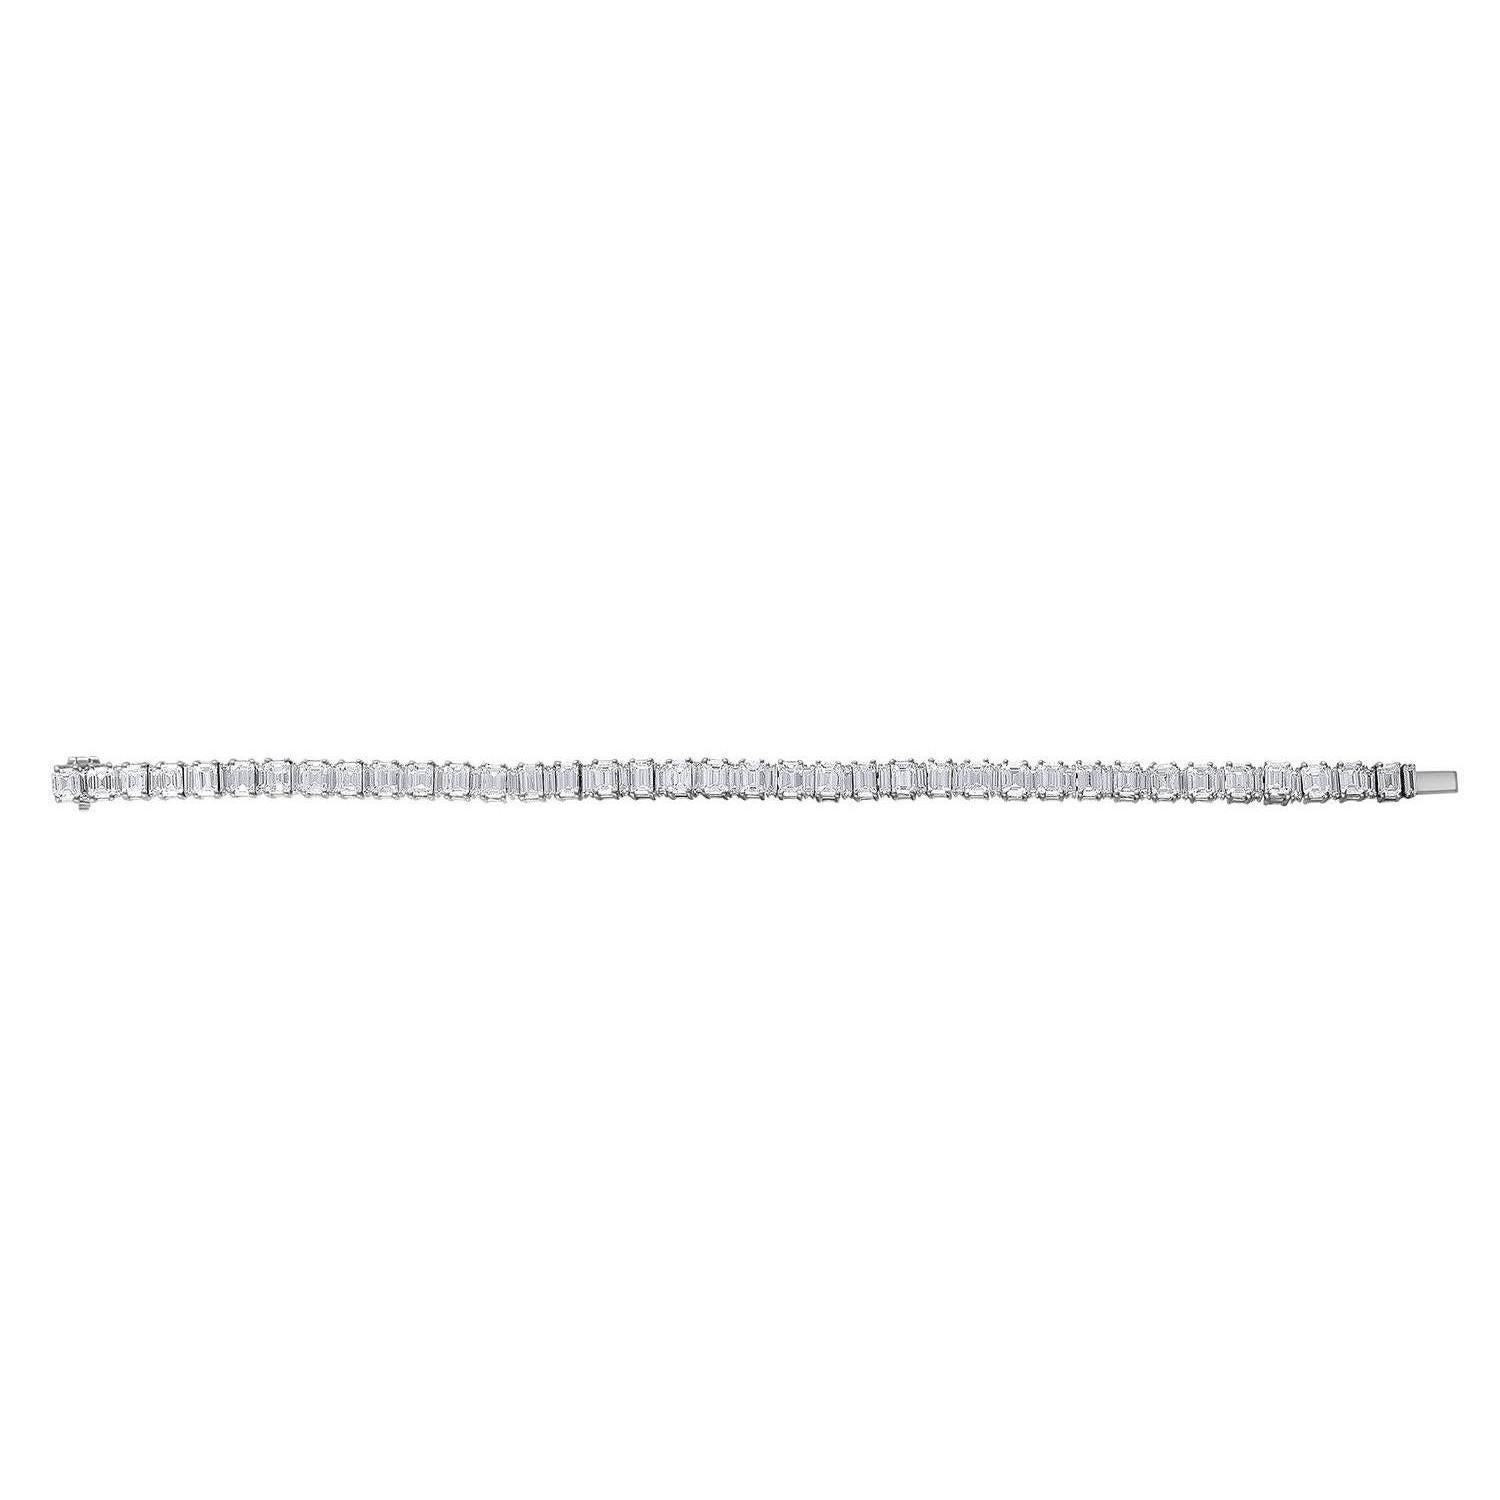 Beautiful Combination of Emerald cut Diamonds and Baguettes set together in a Tennis Bracelet. The Diamonds are alternating and giving the bracelet a unique look.
The Emerald Cut Diamonds are 37 Diamonds and they weigh 12.95 Carats in Total. The 37